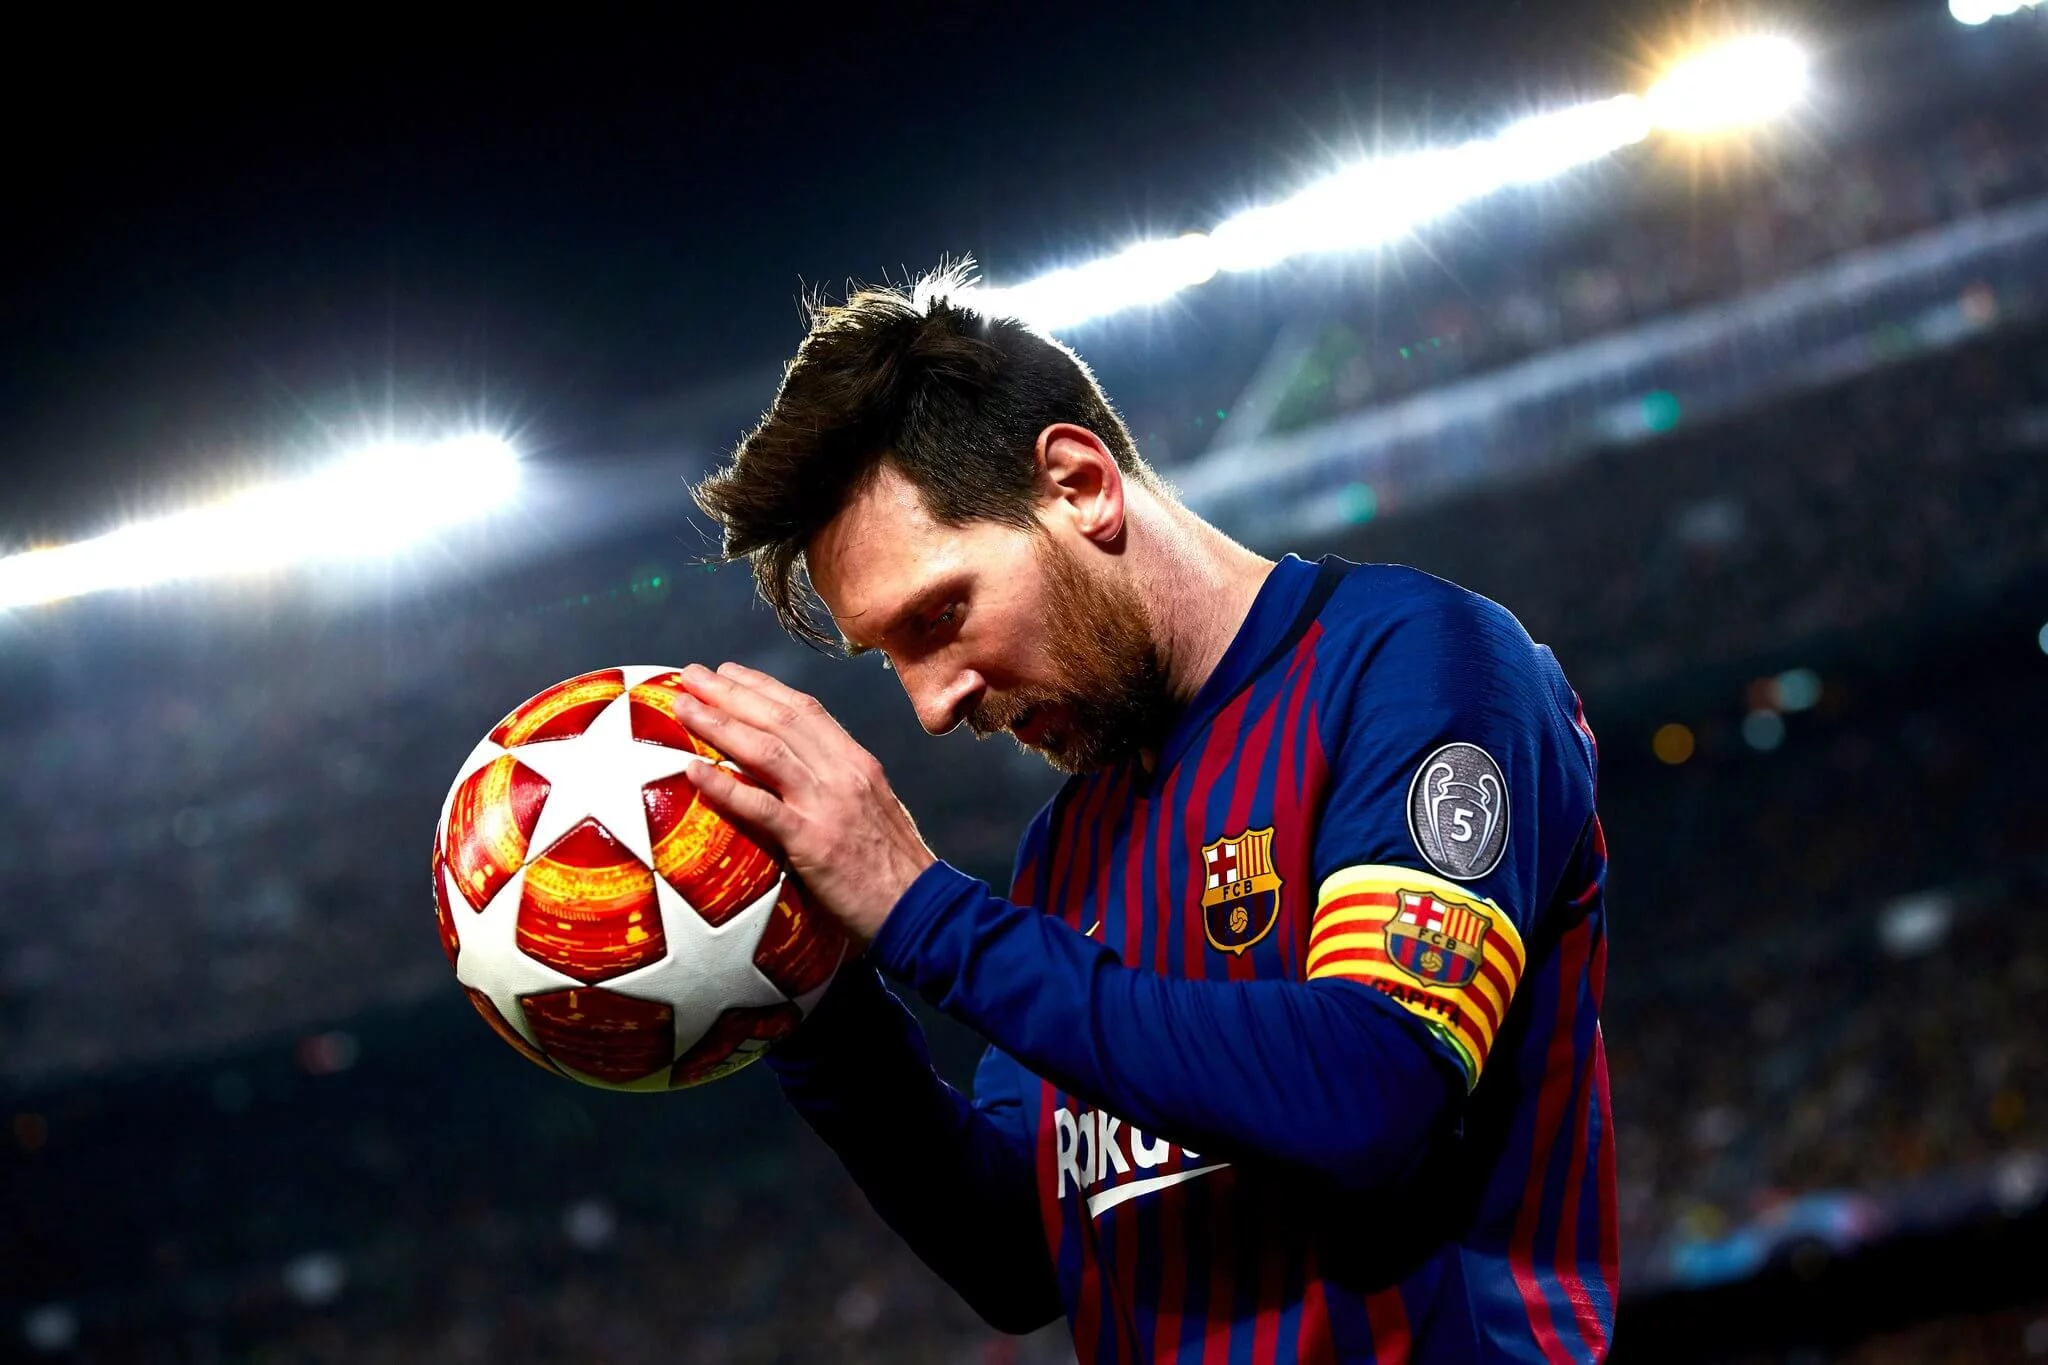 Happy Birthday Messi - Soccer fans from around the world wish happy birthday to lionel messi